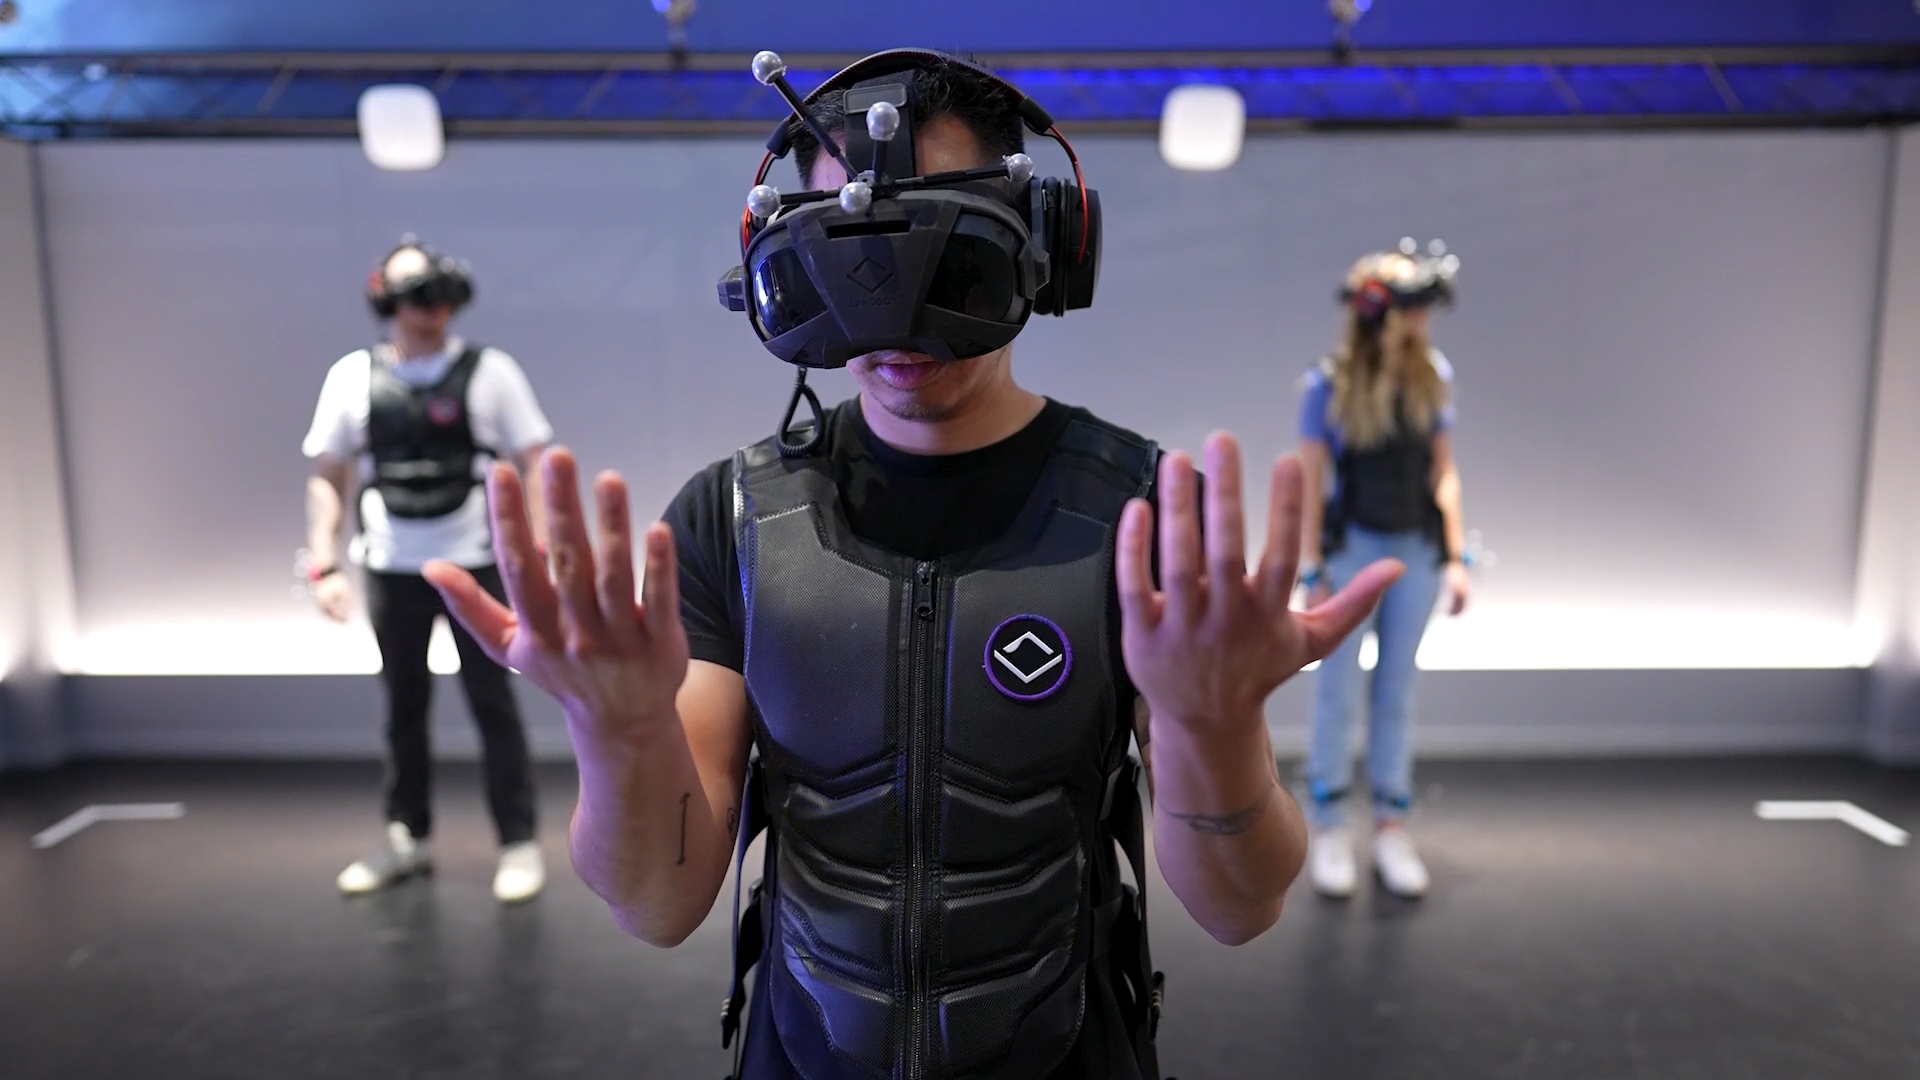 The Sandbox VR “Squid Game Virtuals” VR experience transports players to iconic Squid Game locations, where they become contestants in various pulse-pounding challenges inspired by the Netflix series and compete against each other to be the last one standing.